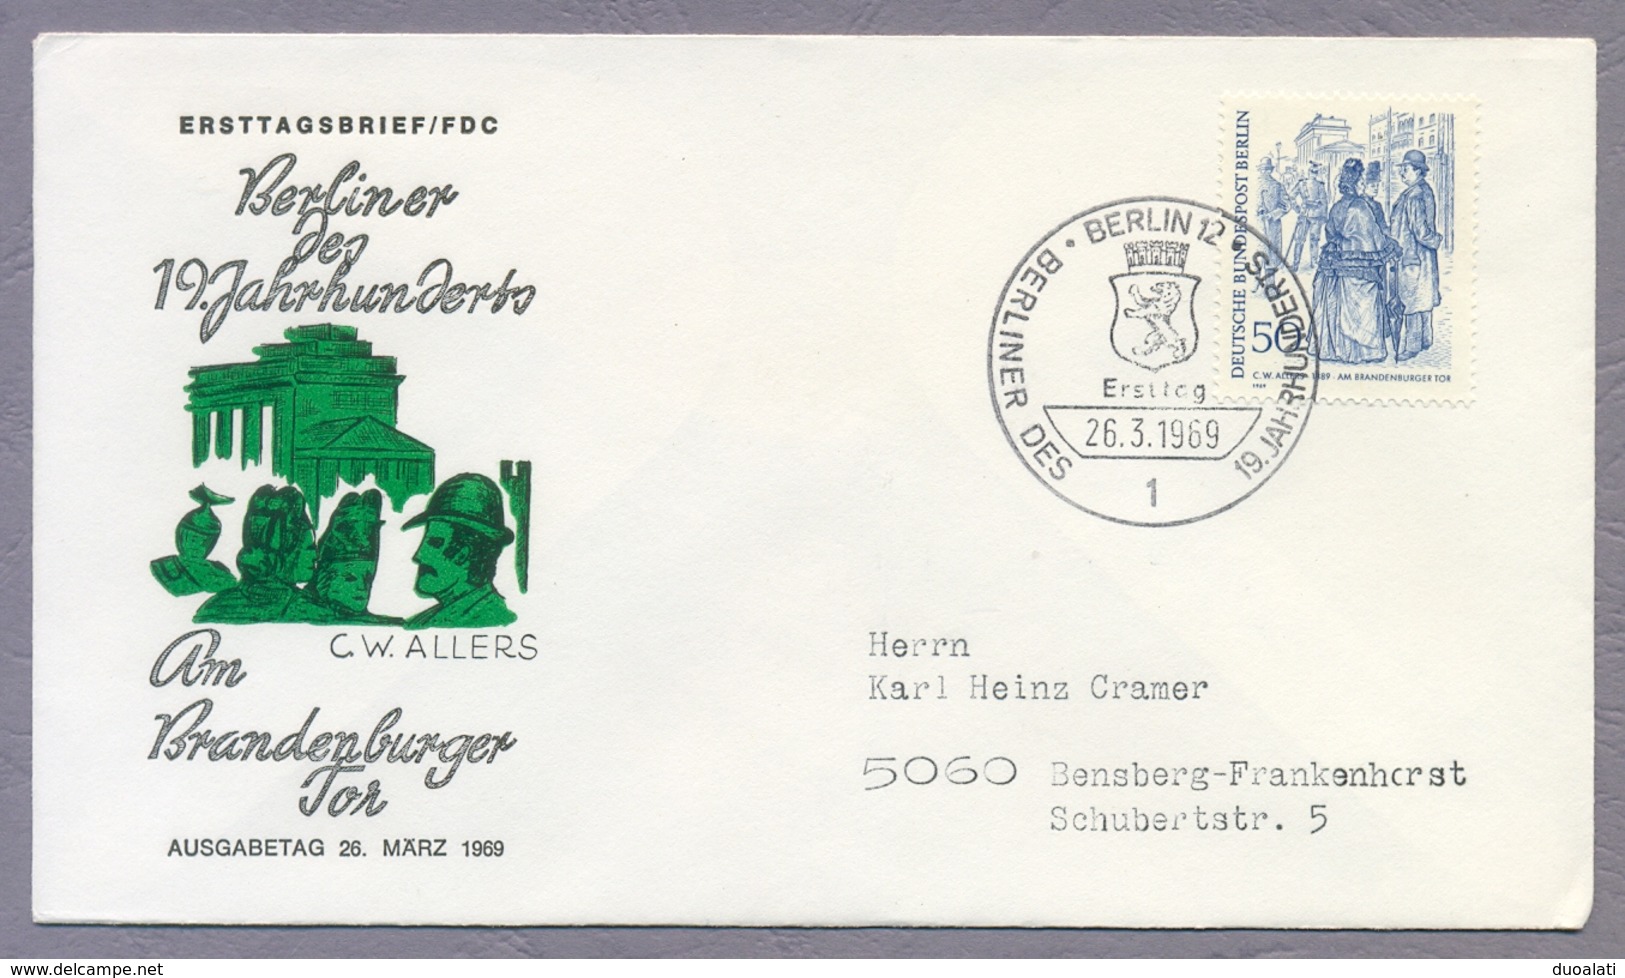 Germany Berlin 1969 8 x FDC Berliner des 19. Jahrhunderts Famous Berlin People of the 19th Century